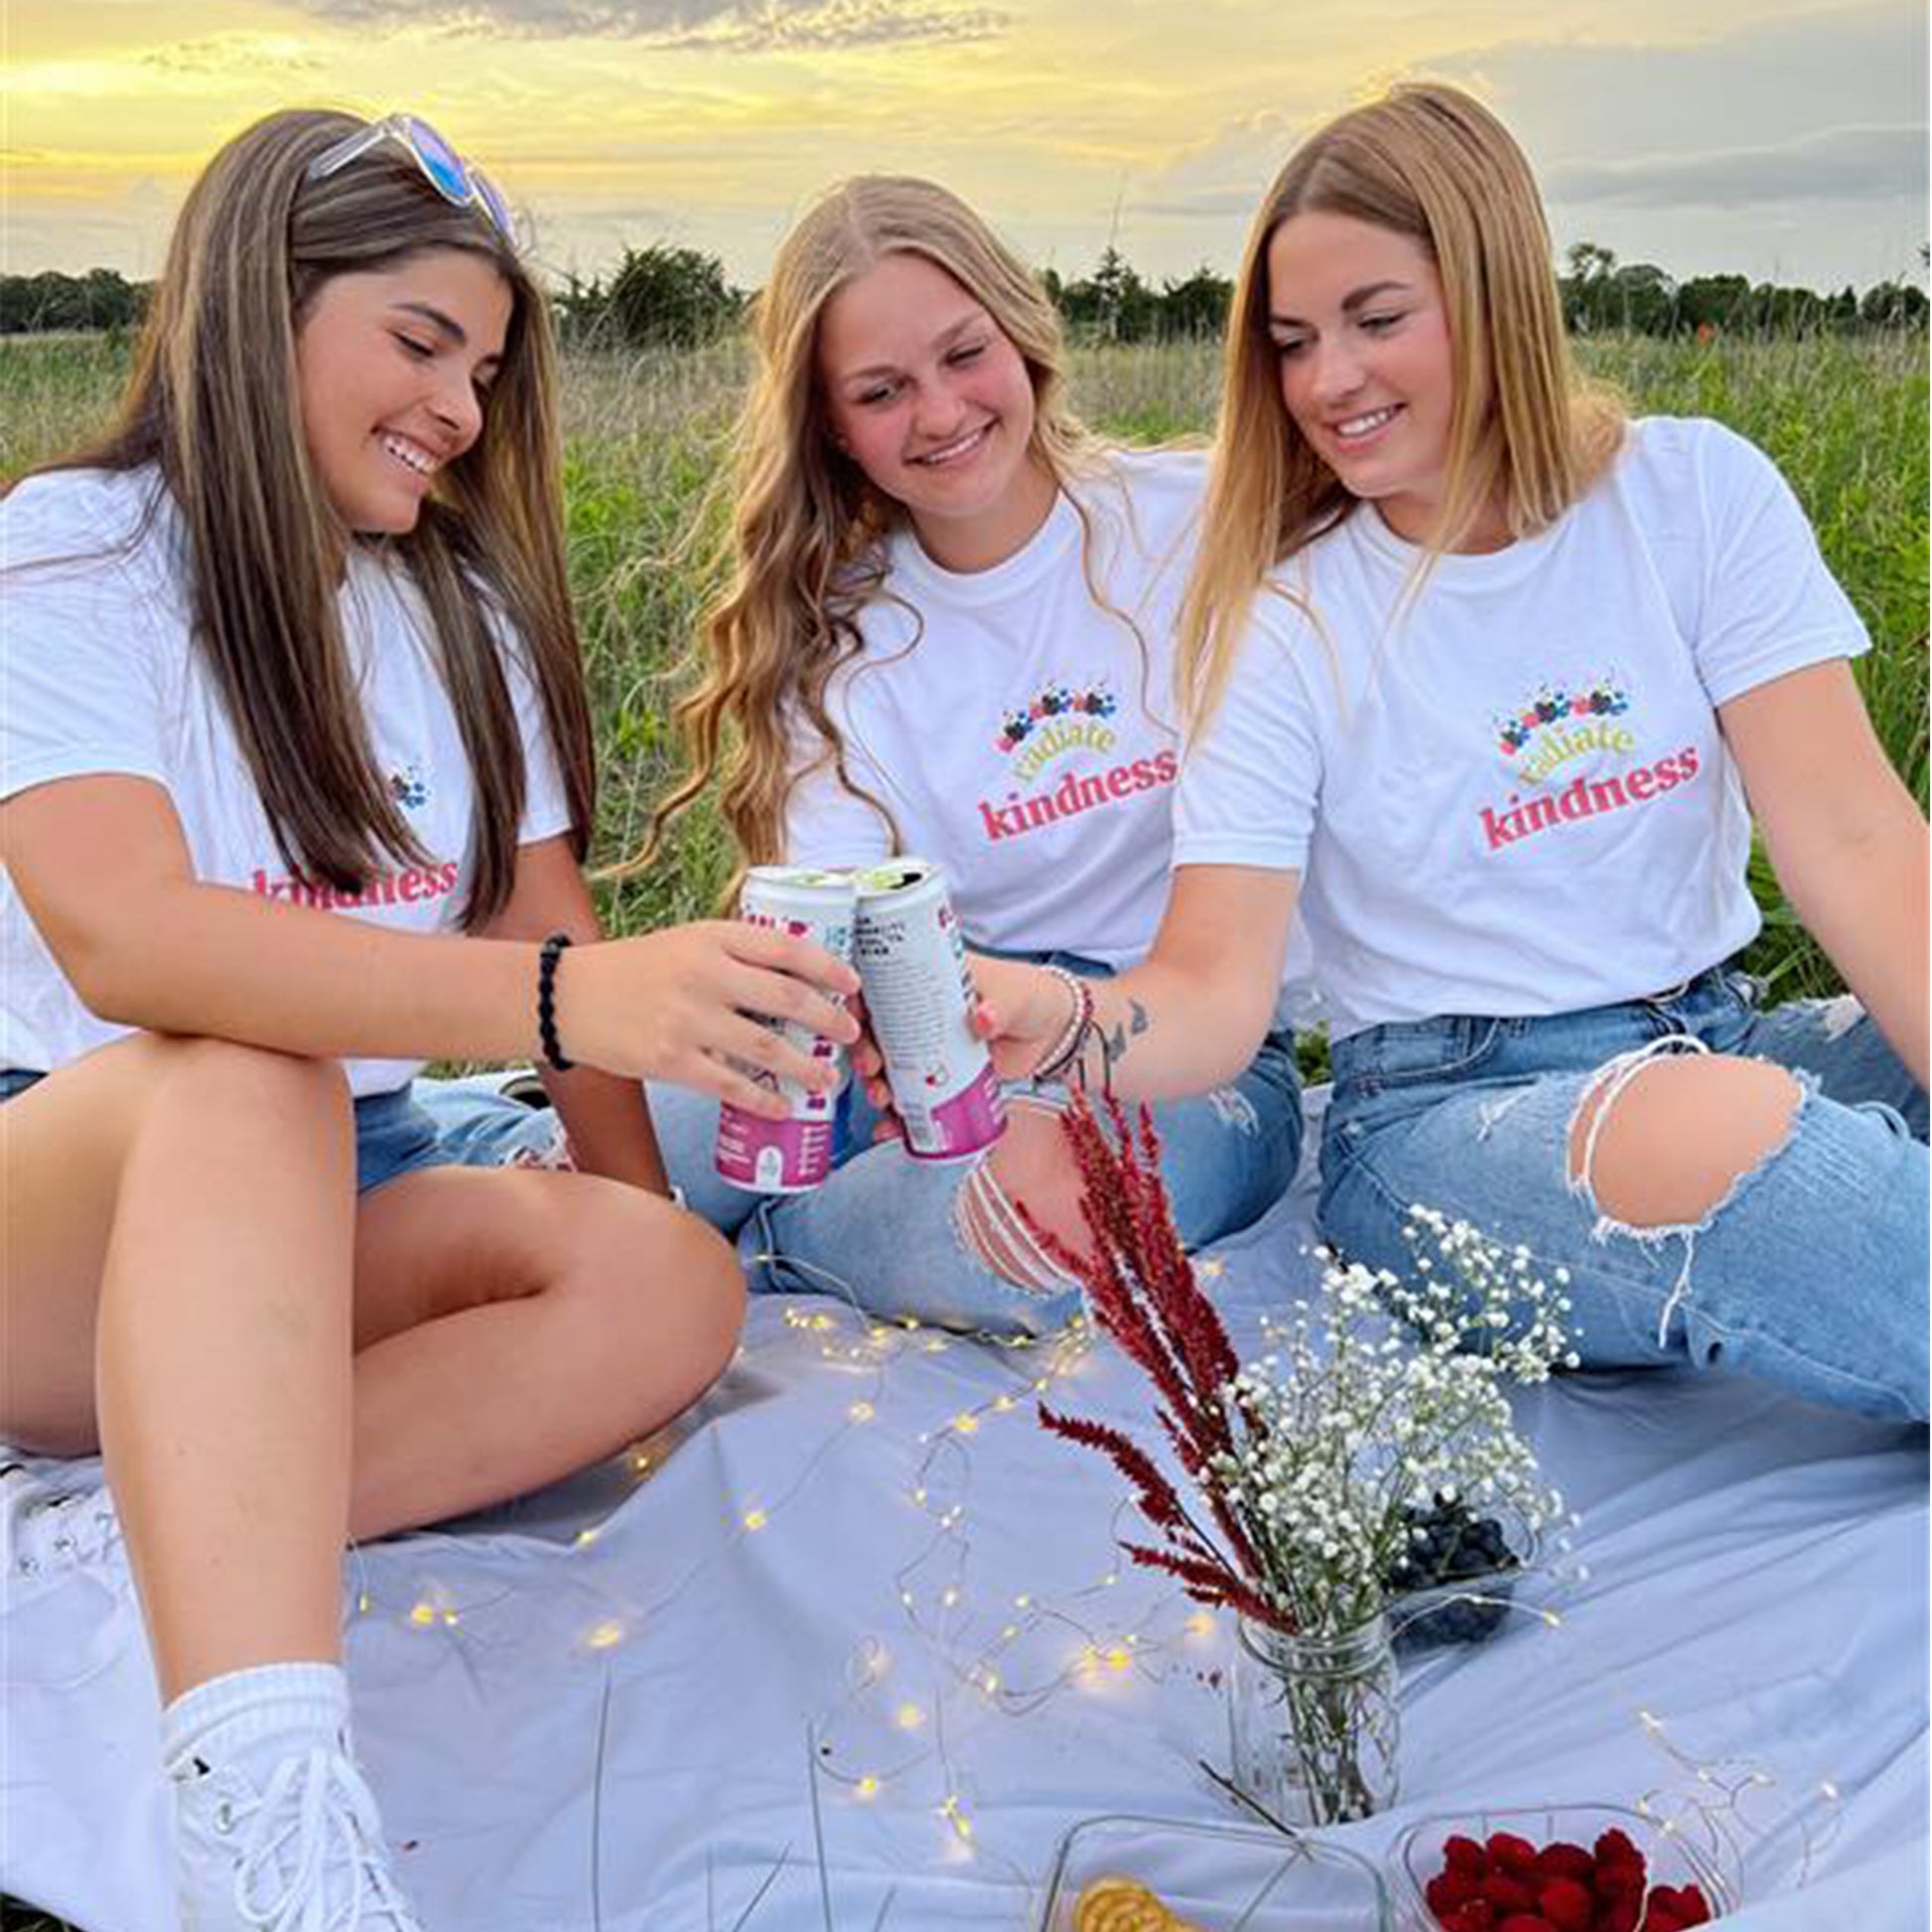 three young women toasting with three bubbl'r cans wearing white radiate kindness tees